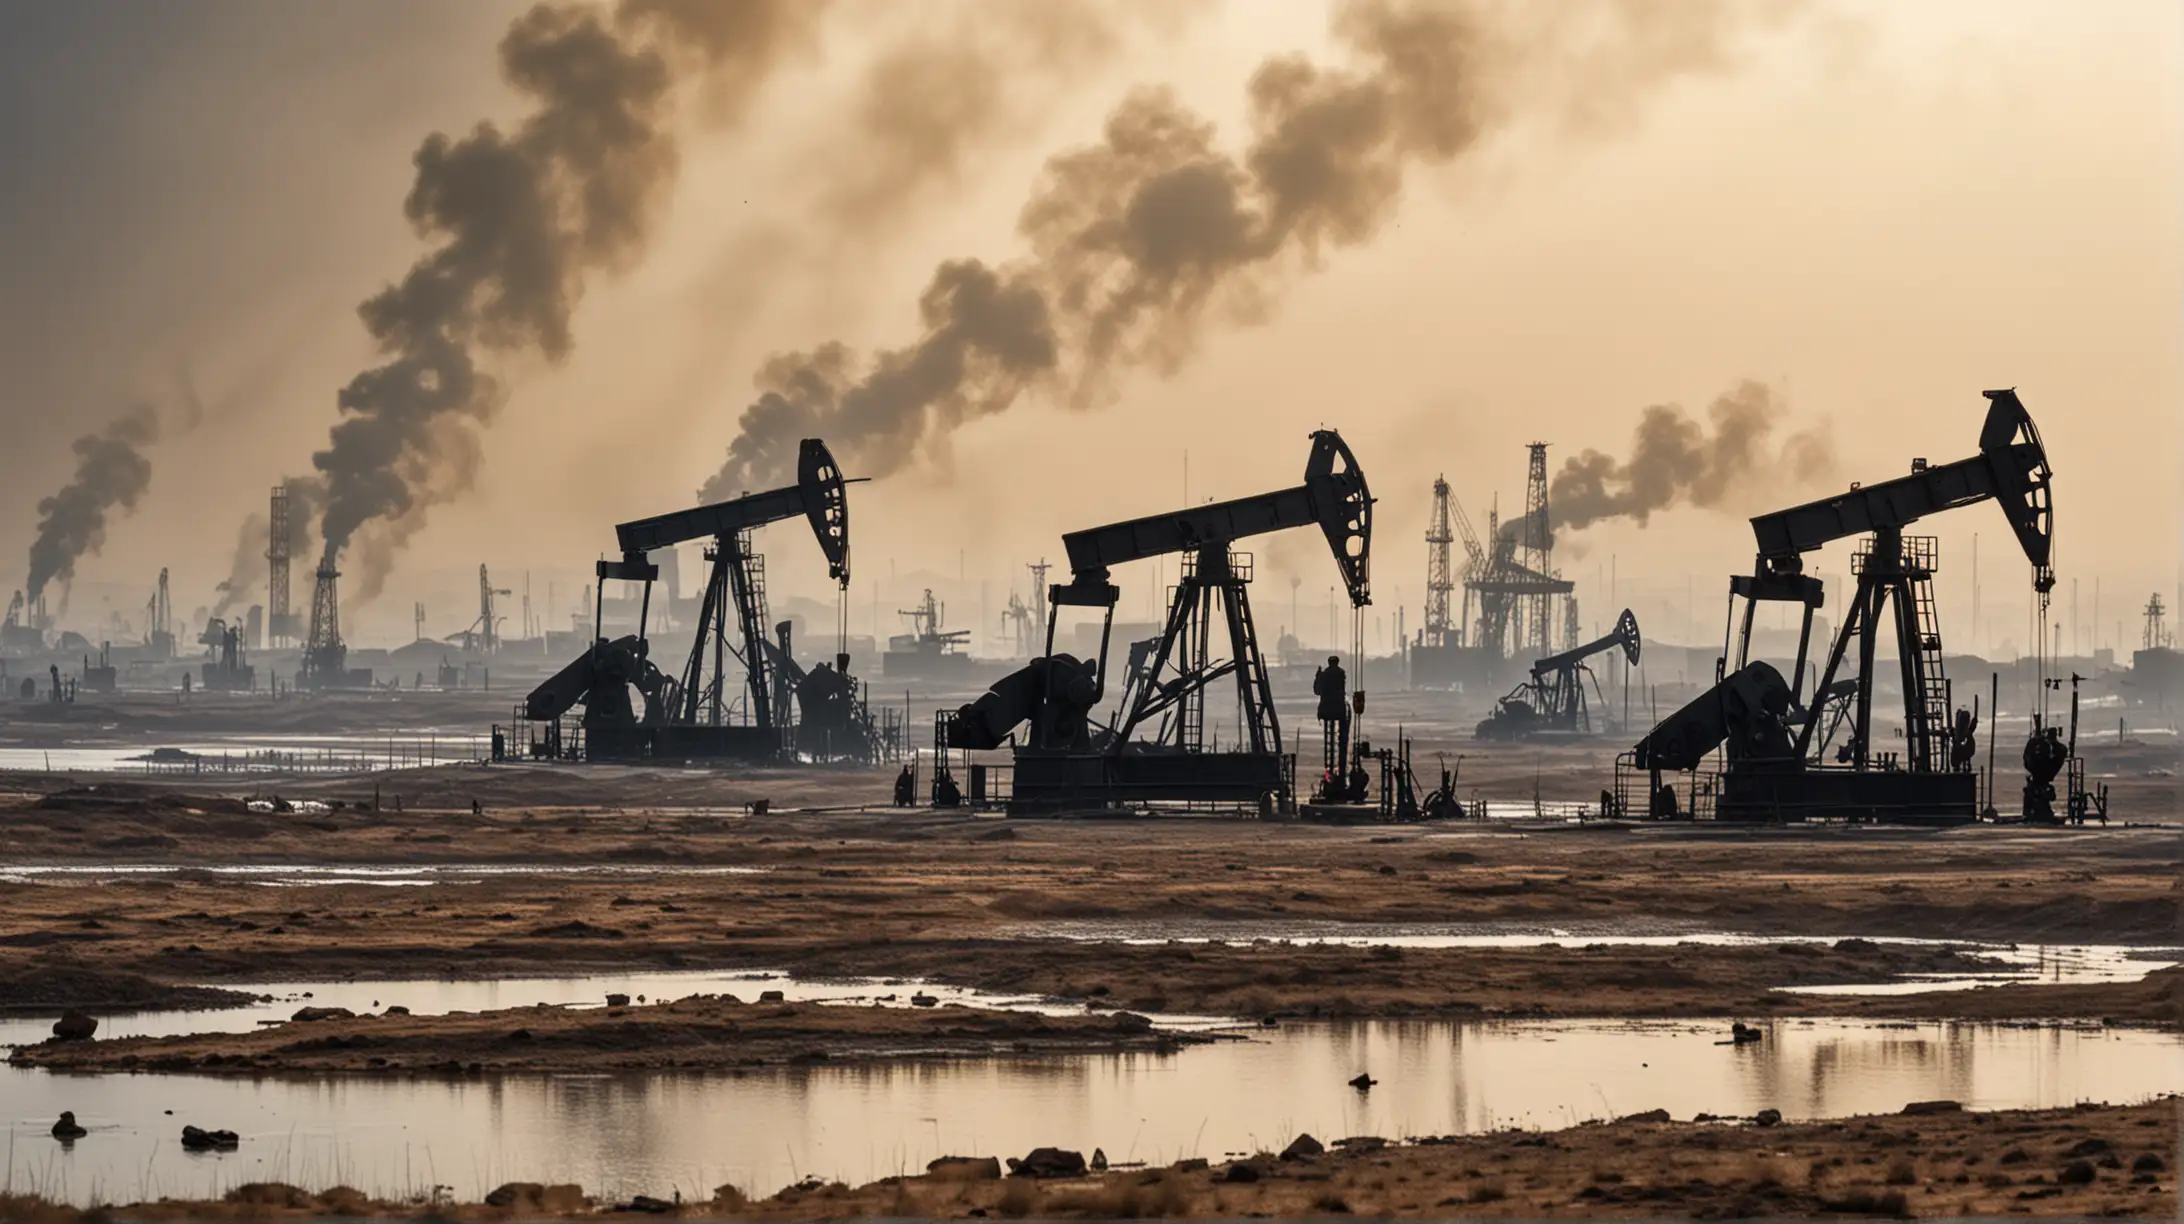 An image showing oil derricks with a backdrop of a conflict-affected area to illustrate the direct connection between geopolitical tensions and oil supply.